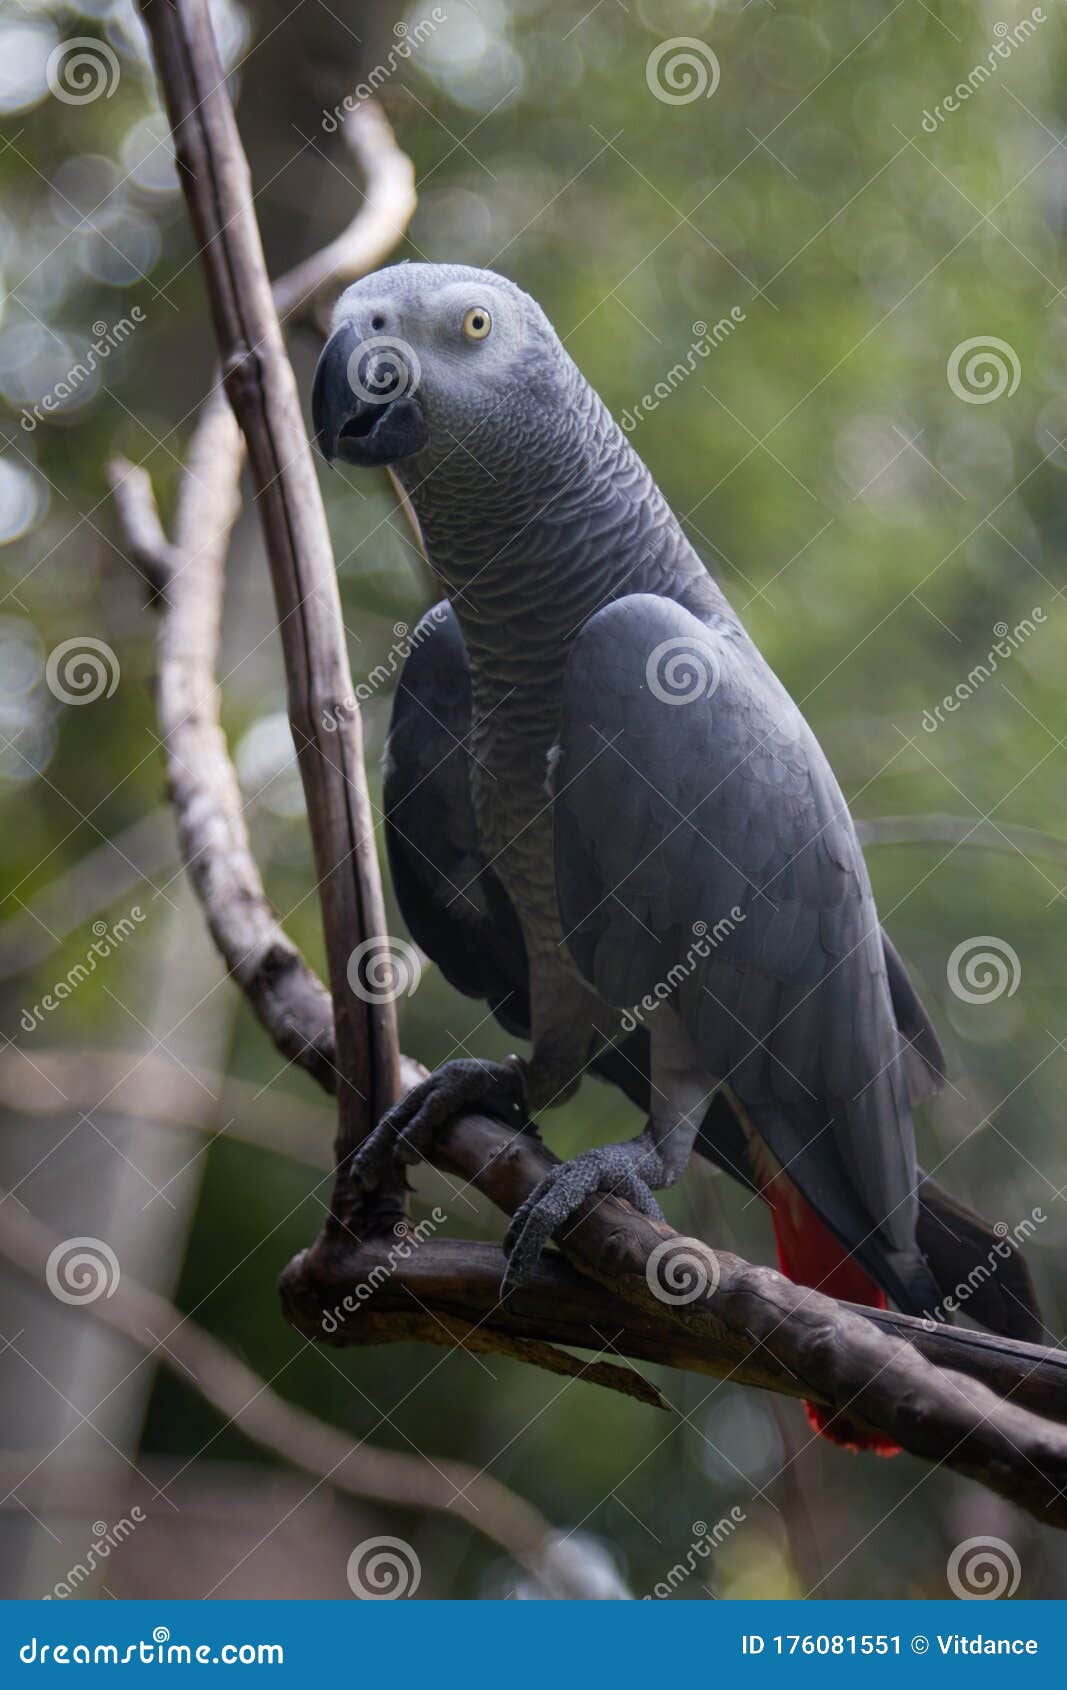 Gray Parrot Red Tail. Stock Image - Image of exotica, background: 176081551